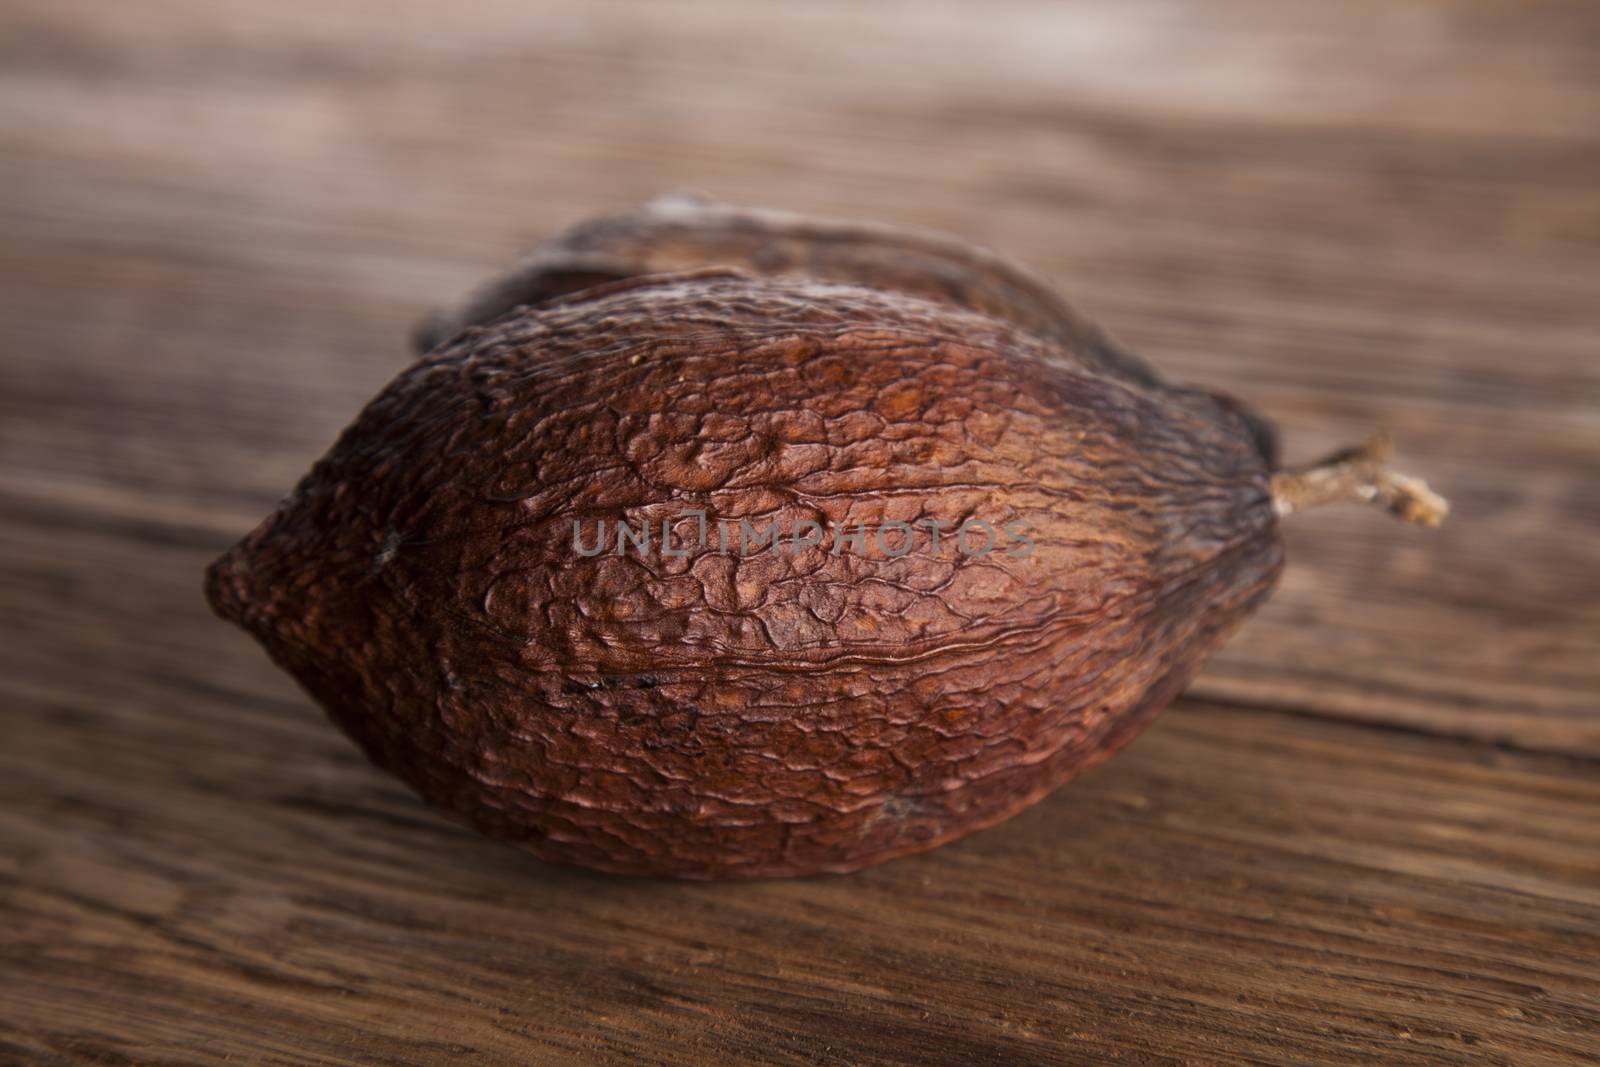 Cocoa pod on wooden table by JanPietruszka